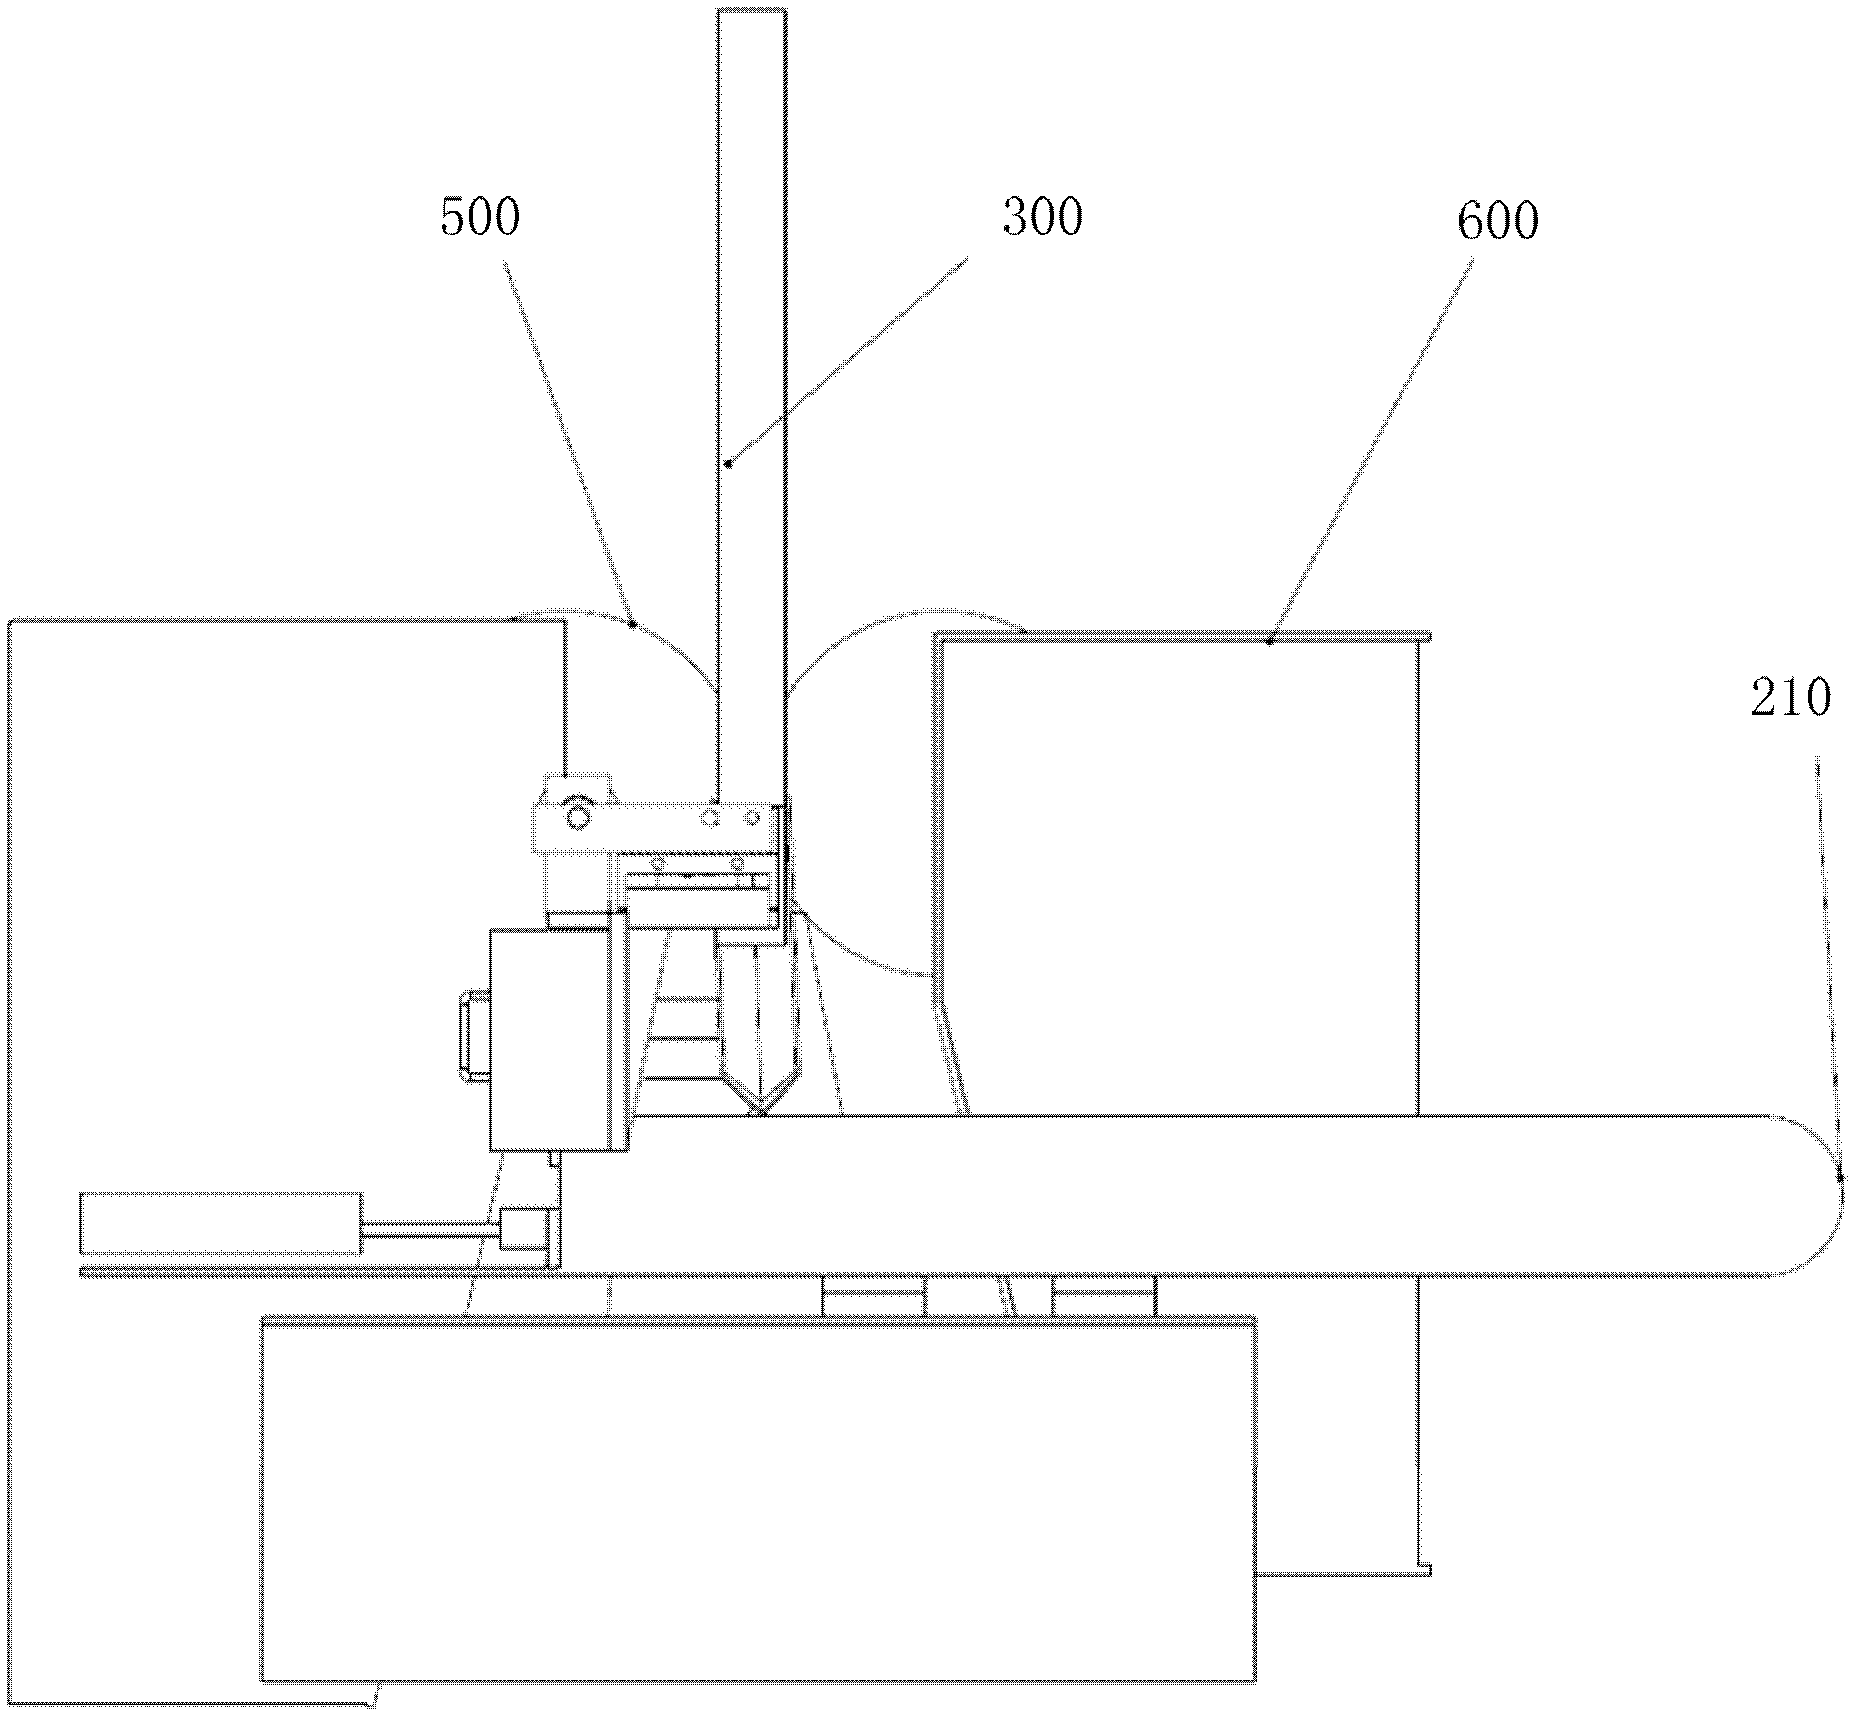 Material feeding and receiving system